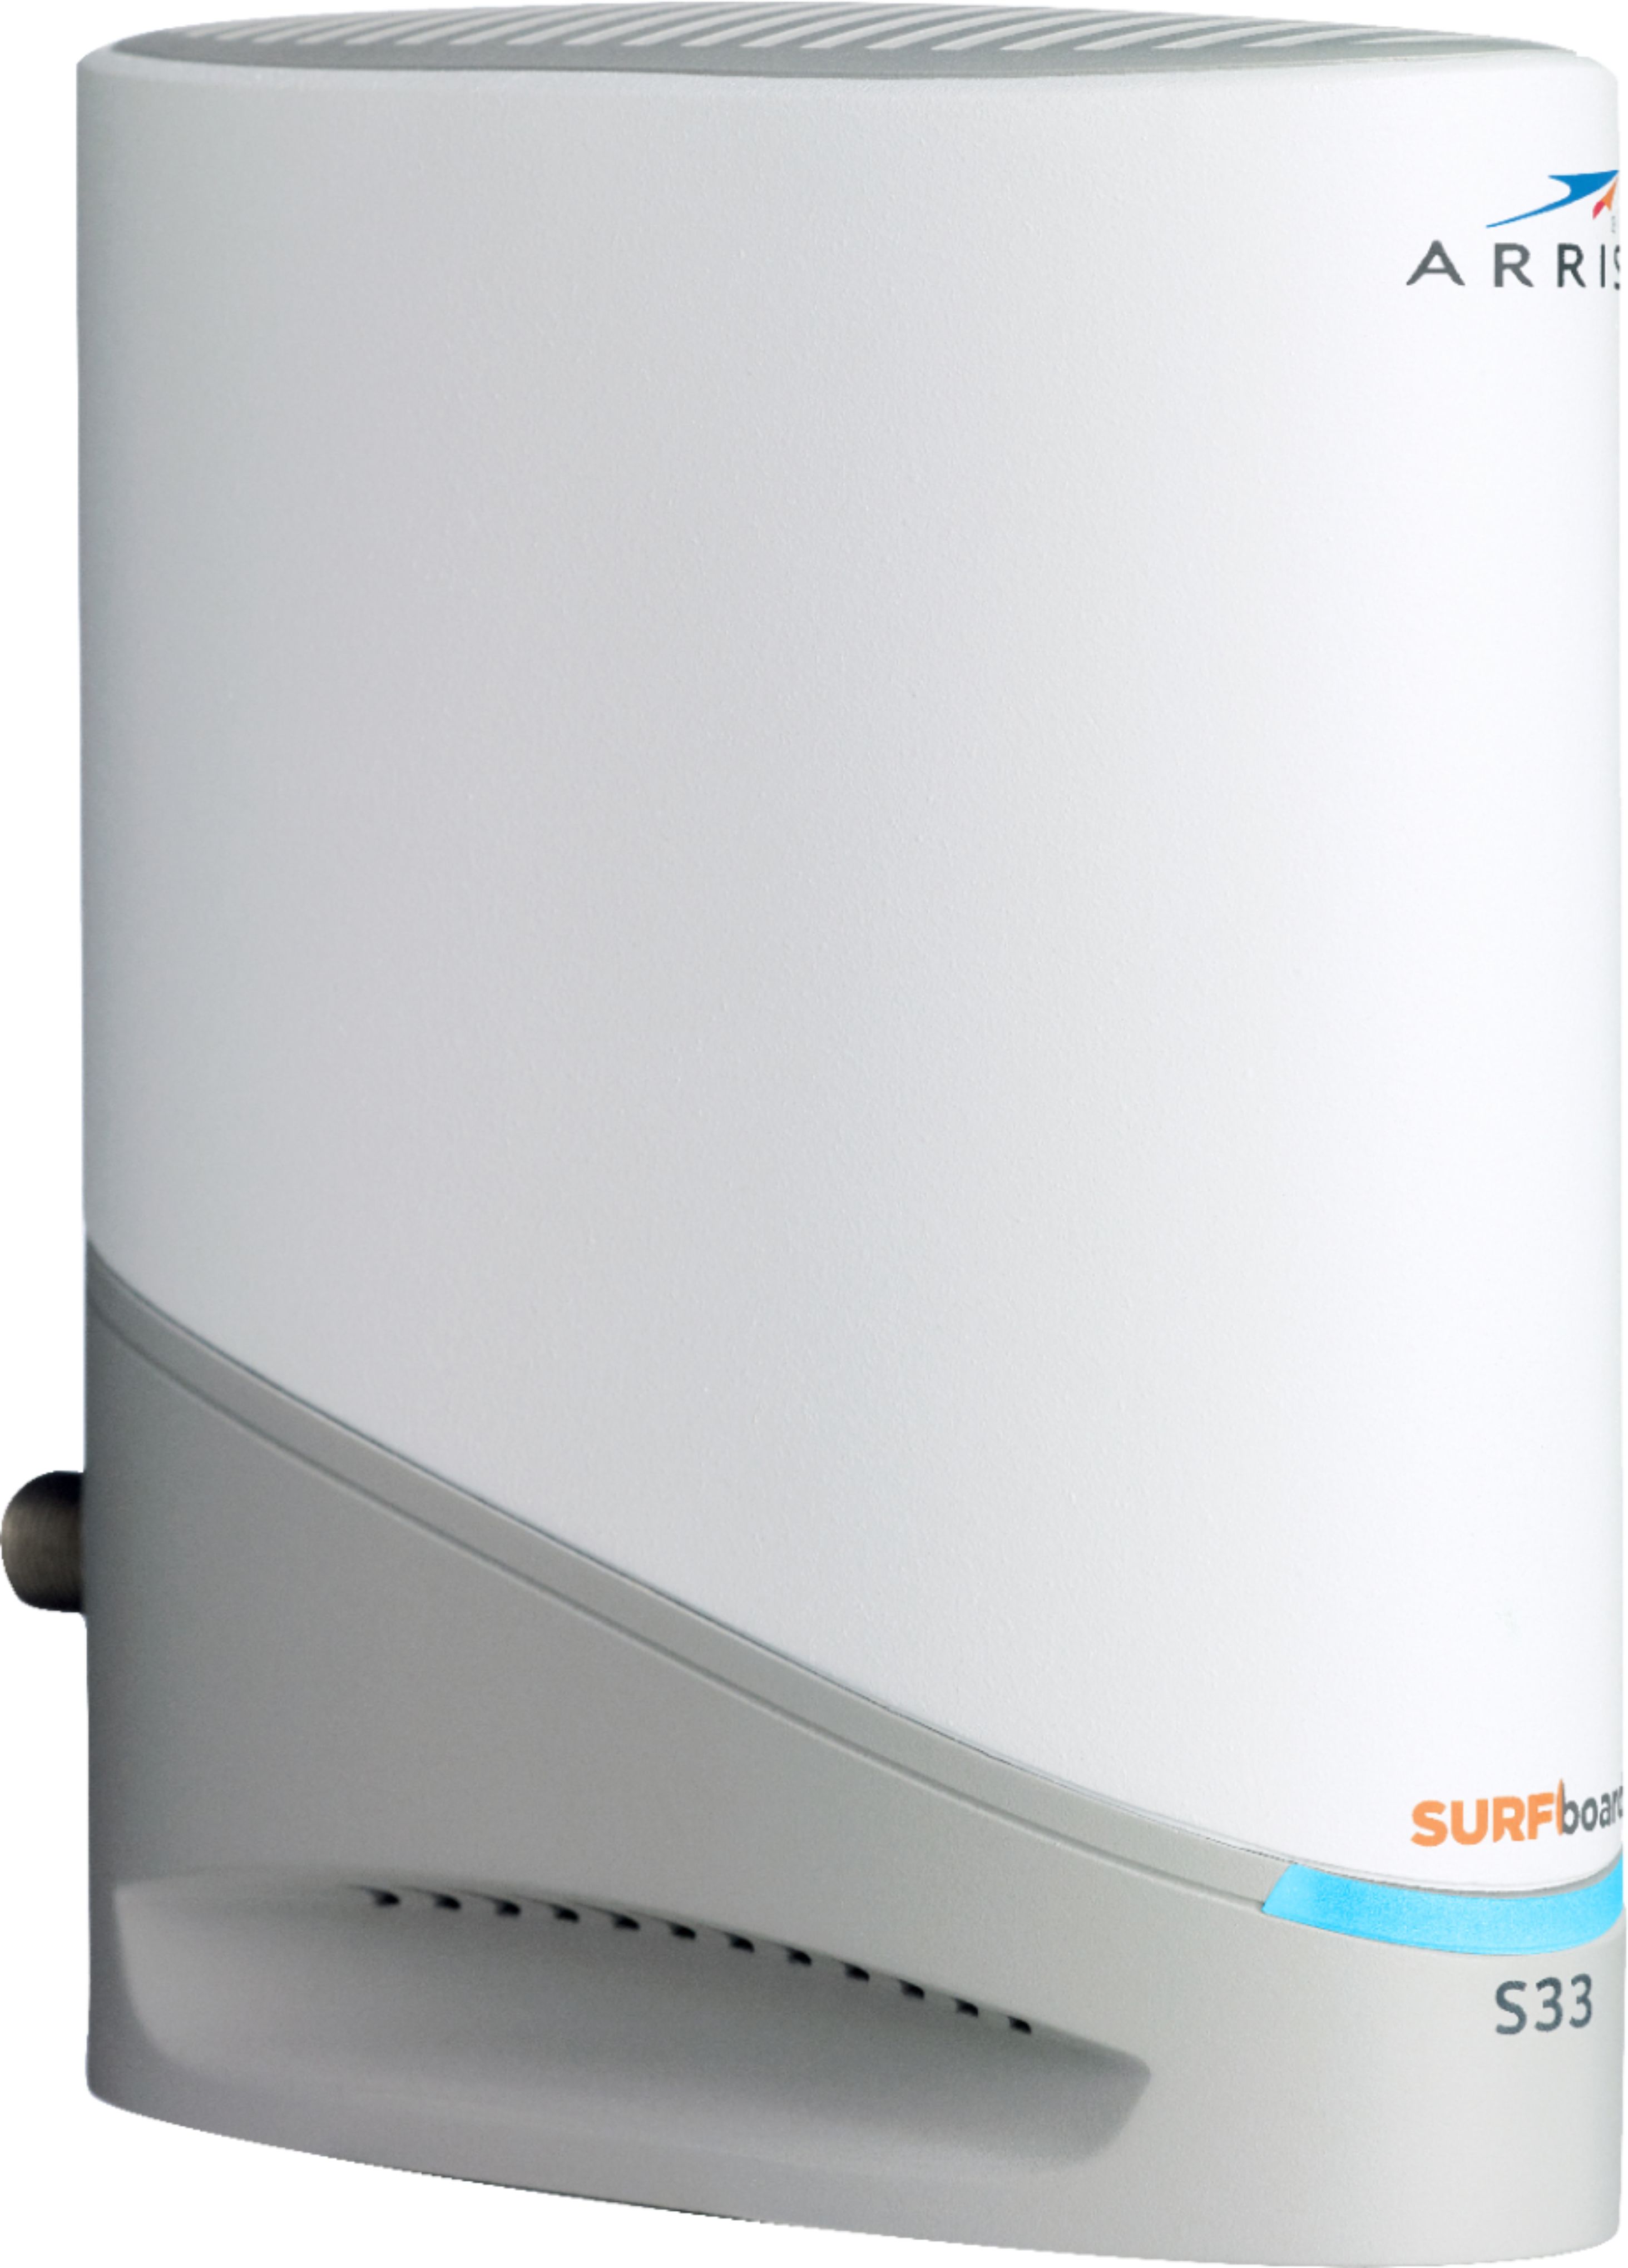 Angle View: ARRIS - SURFboard S33 32 x 8 DOCSIS 3.1 Multi-Gig Cable Modem with 2.5 Gbps Ethernet Port - White